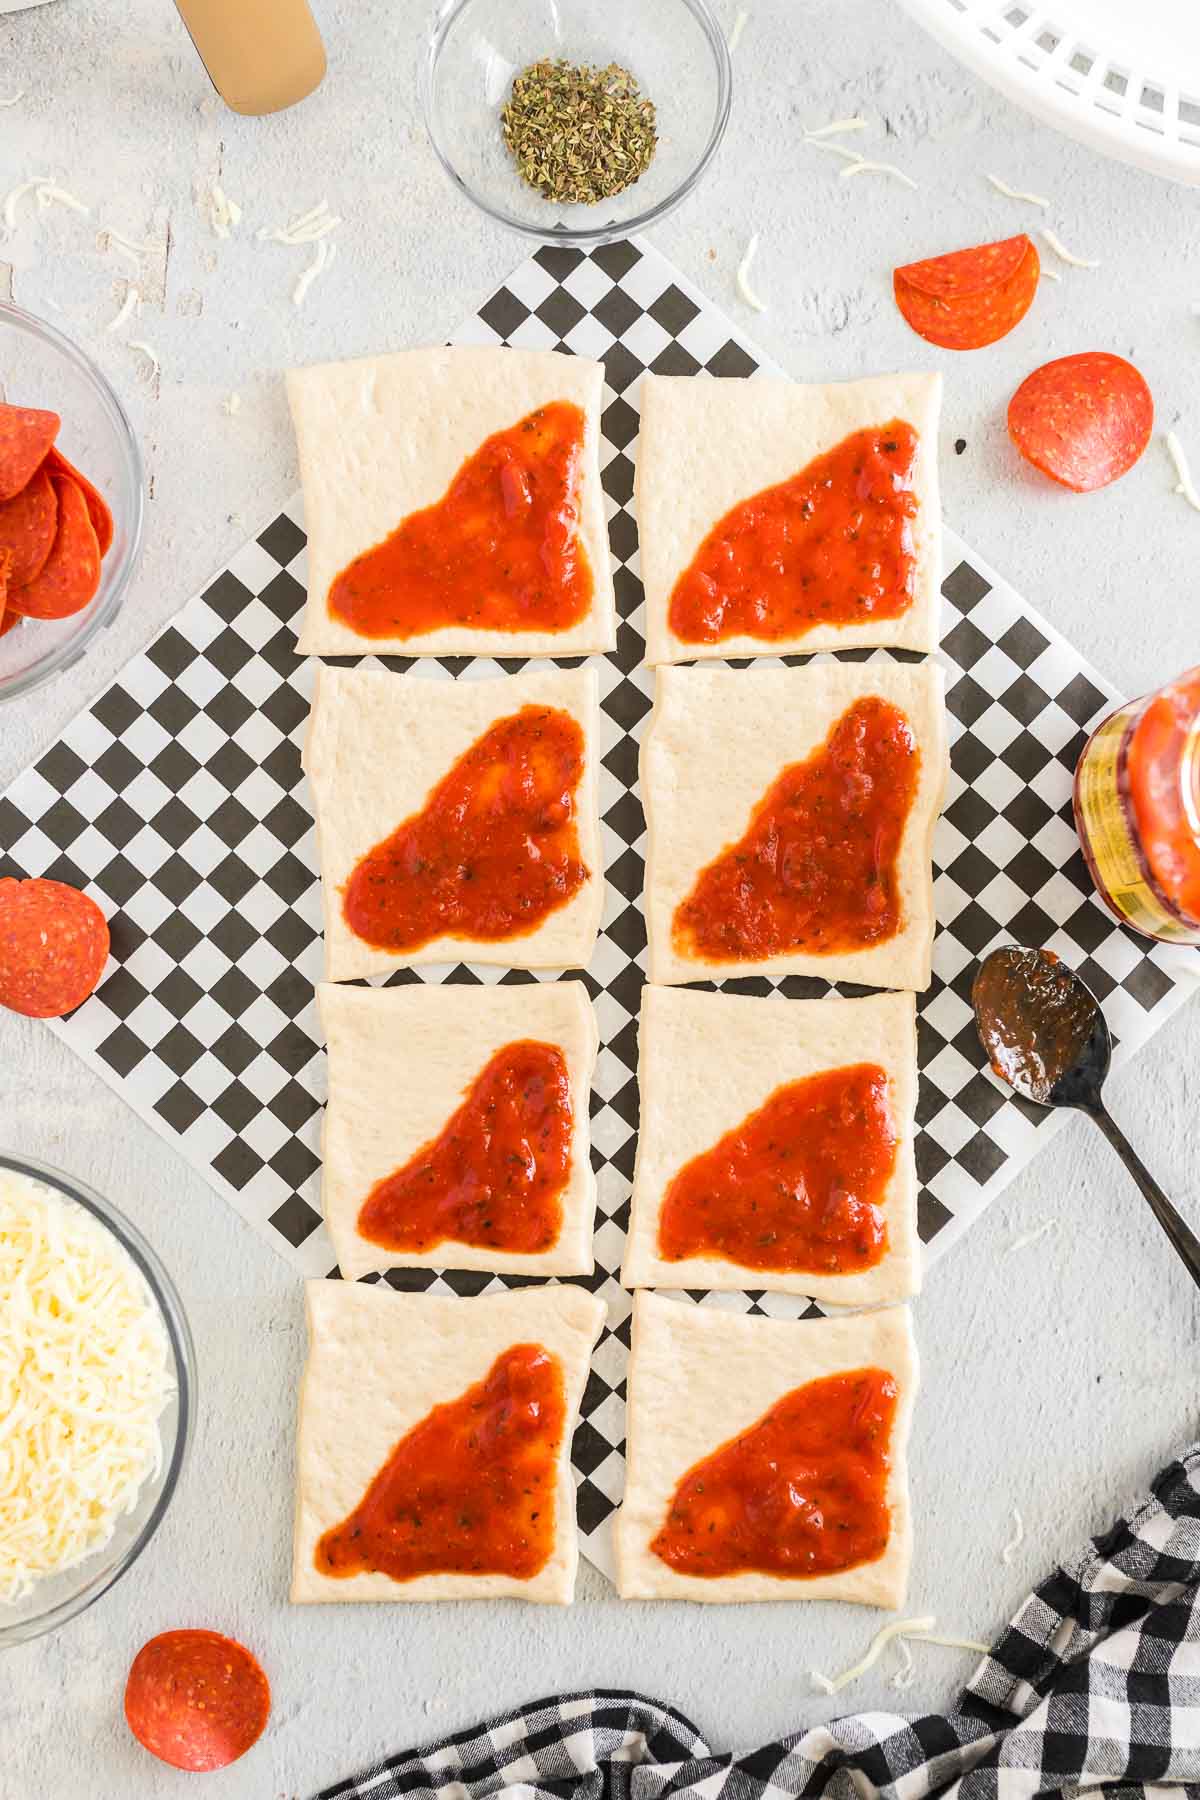 Spoonful of sauce spread onto one triangle half of each pizza dough square.